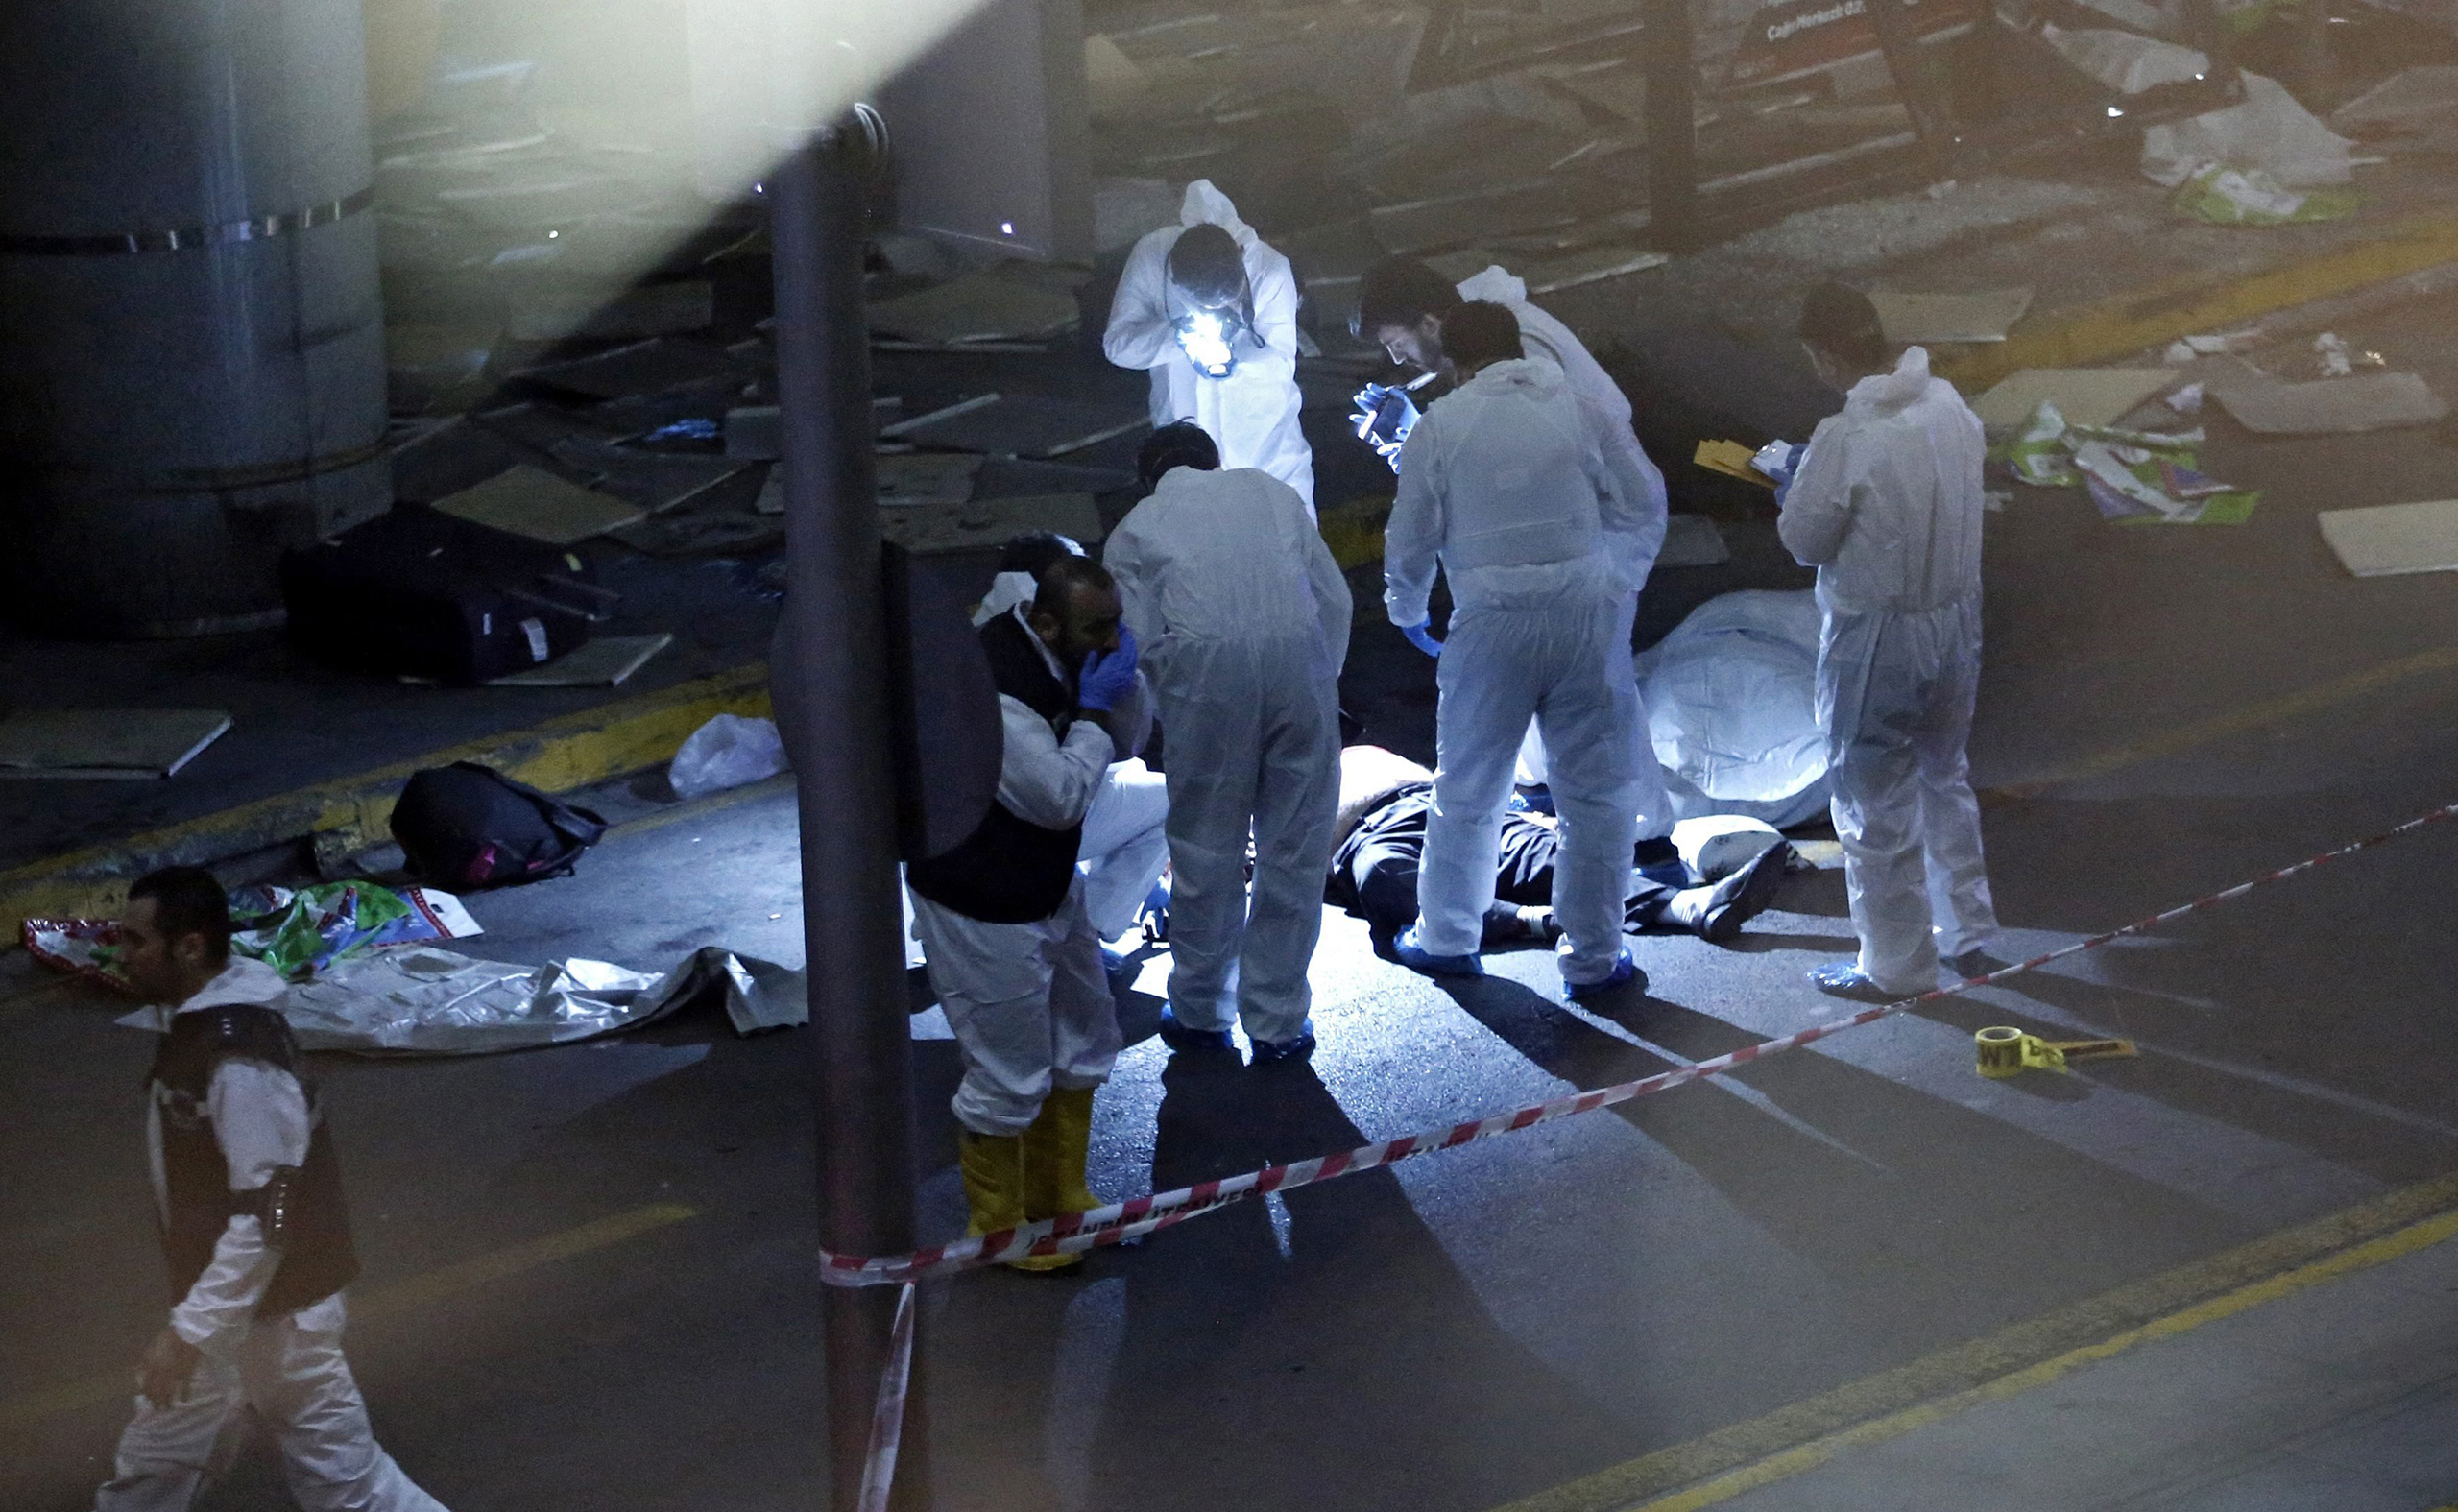 Crime scene investigators work next to a body after a suicide bomb attack at Ataturk Airport in Istanbul on June 28, 2016.